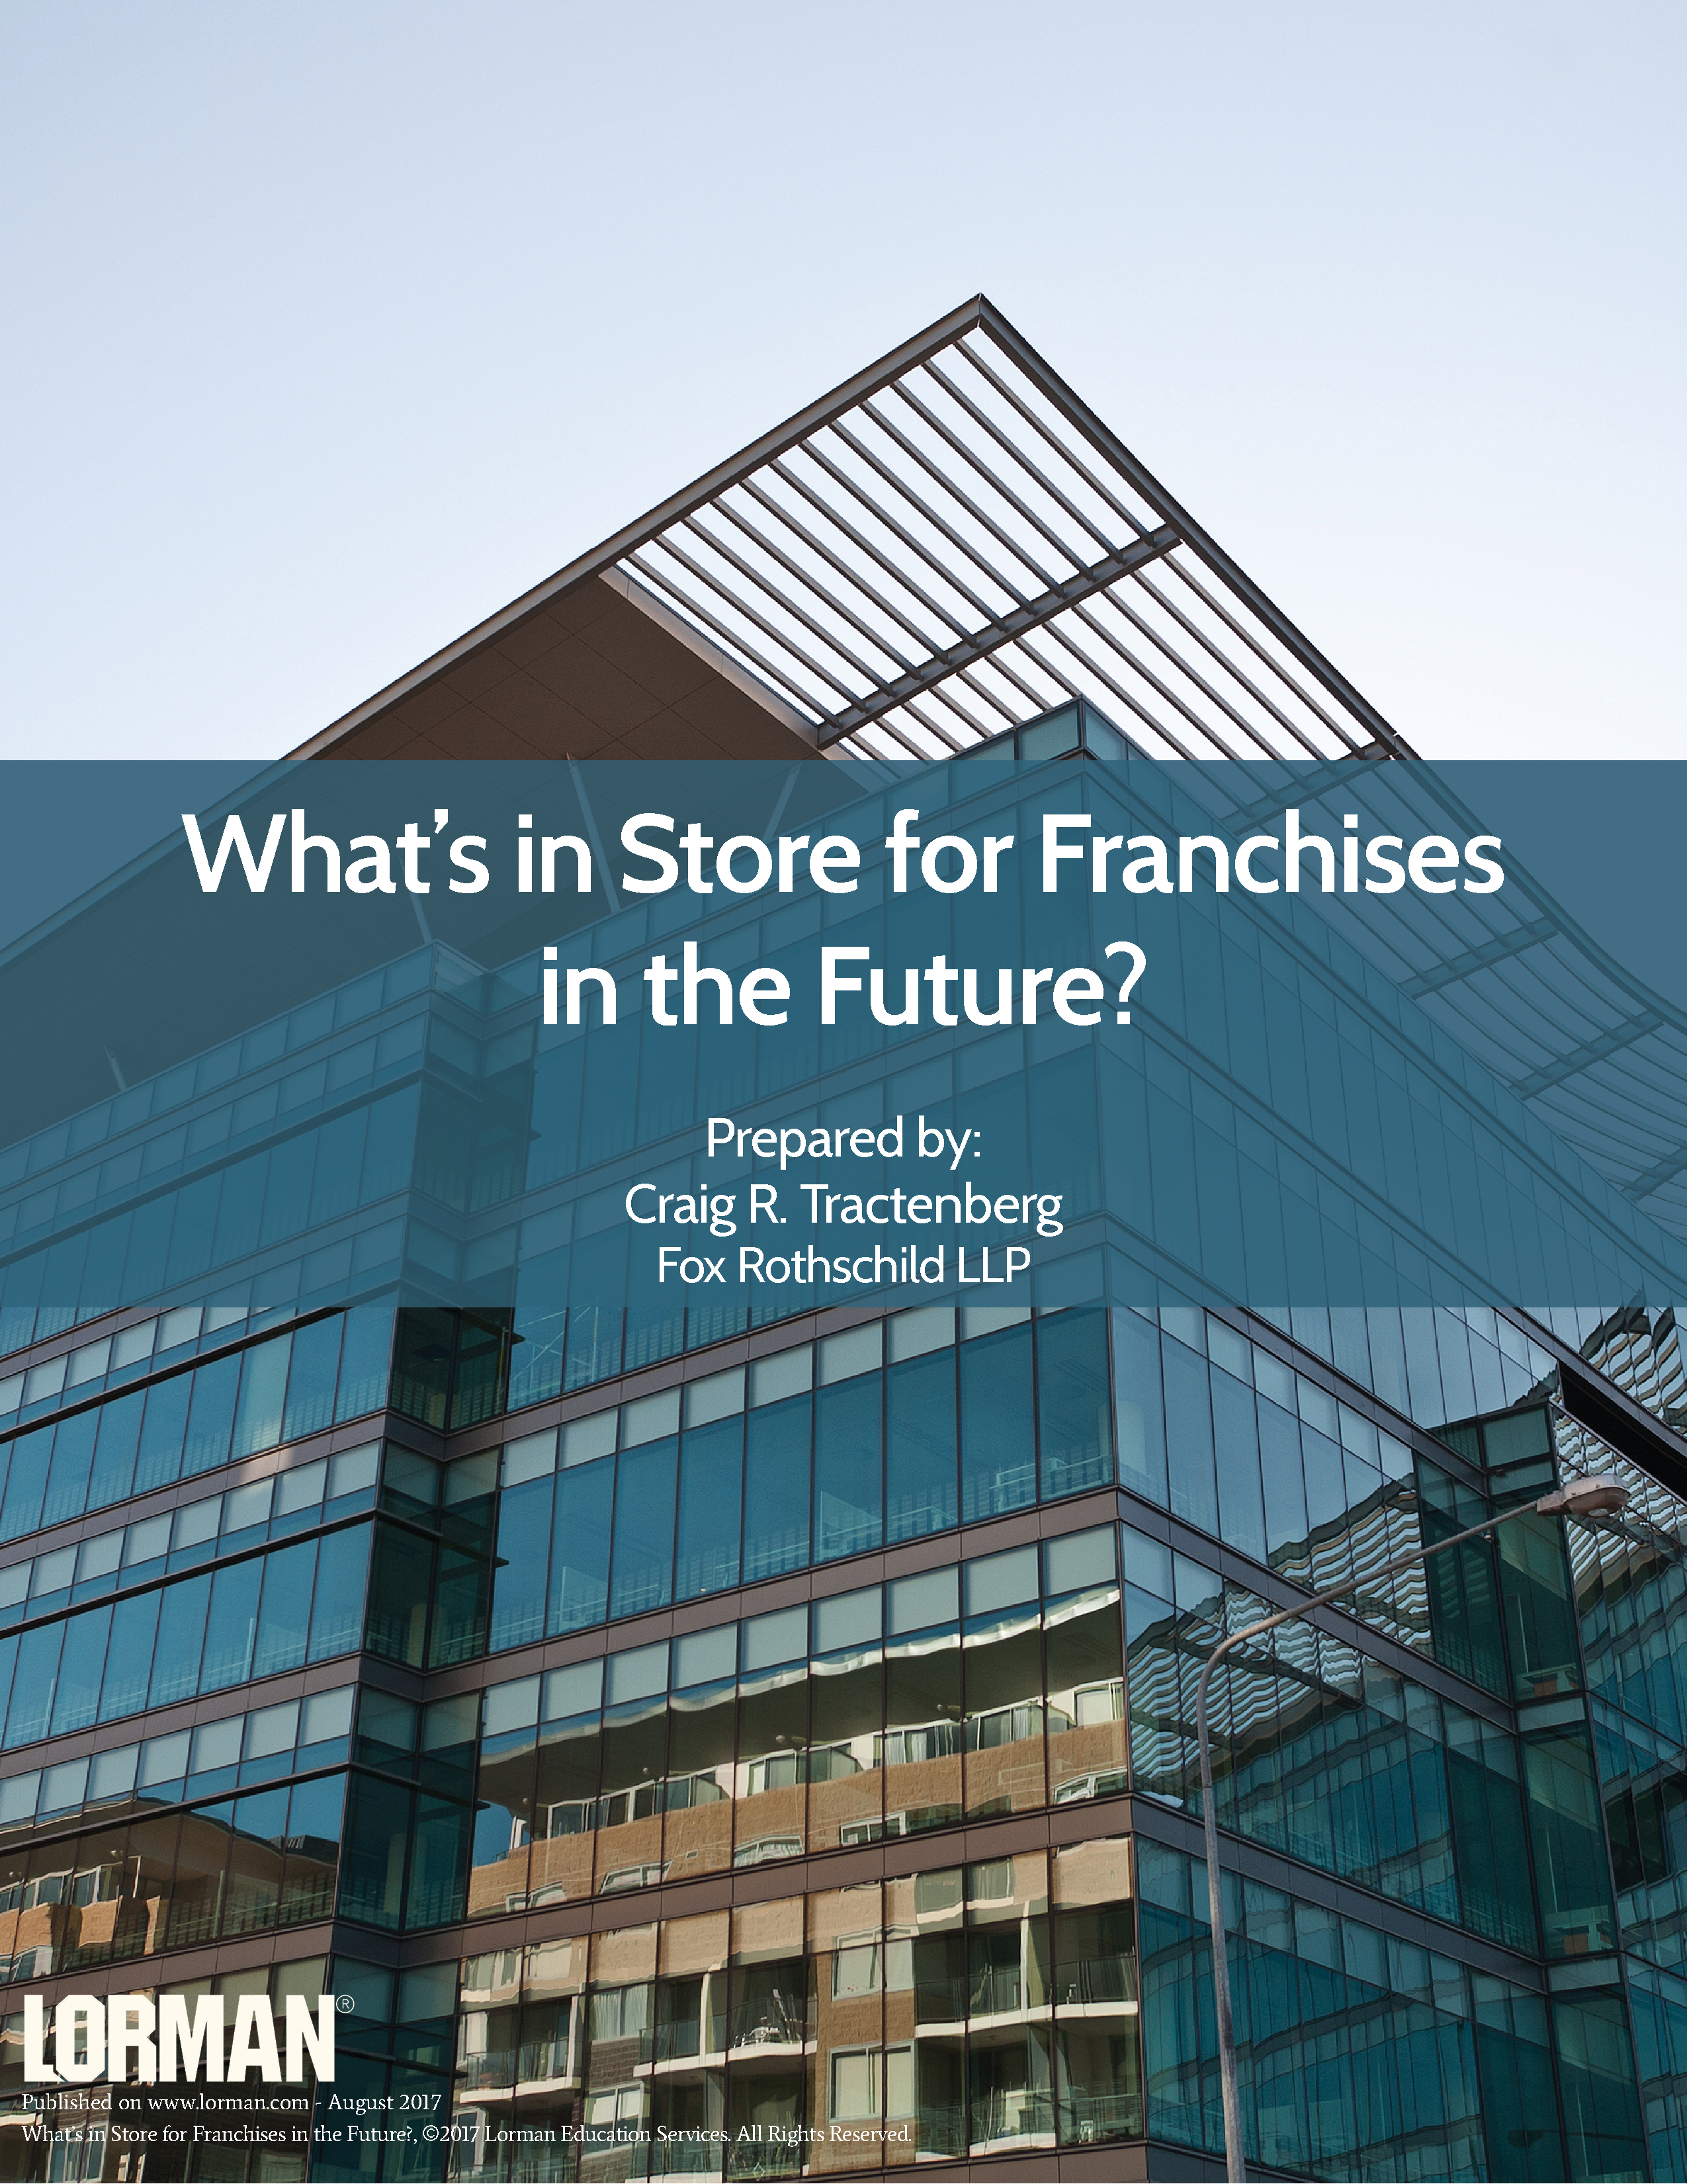 What’s in Store for Franchises in the Future?